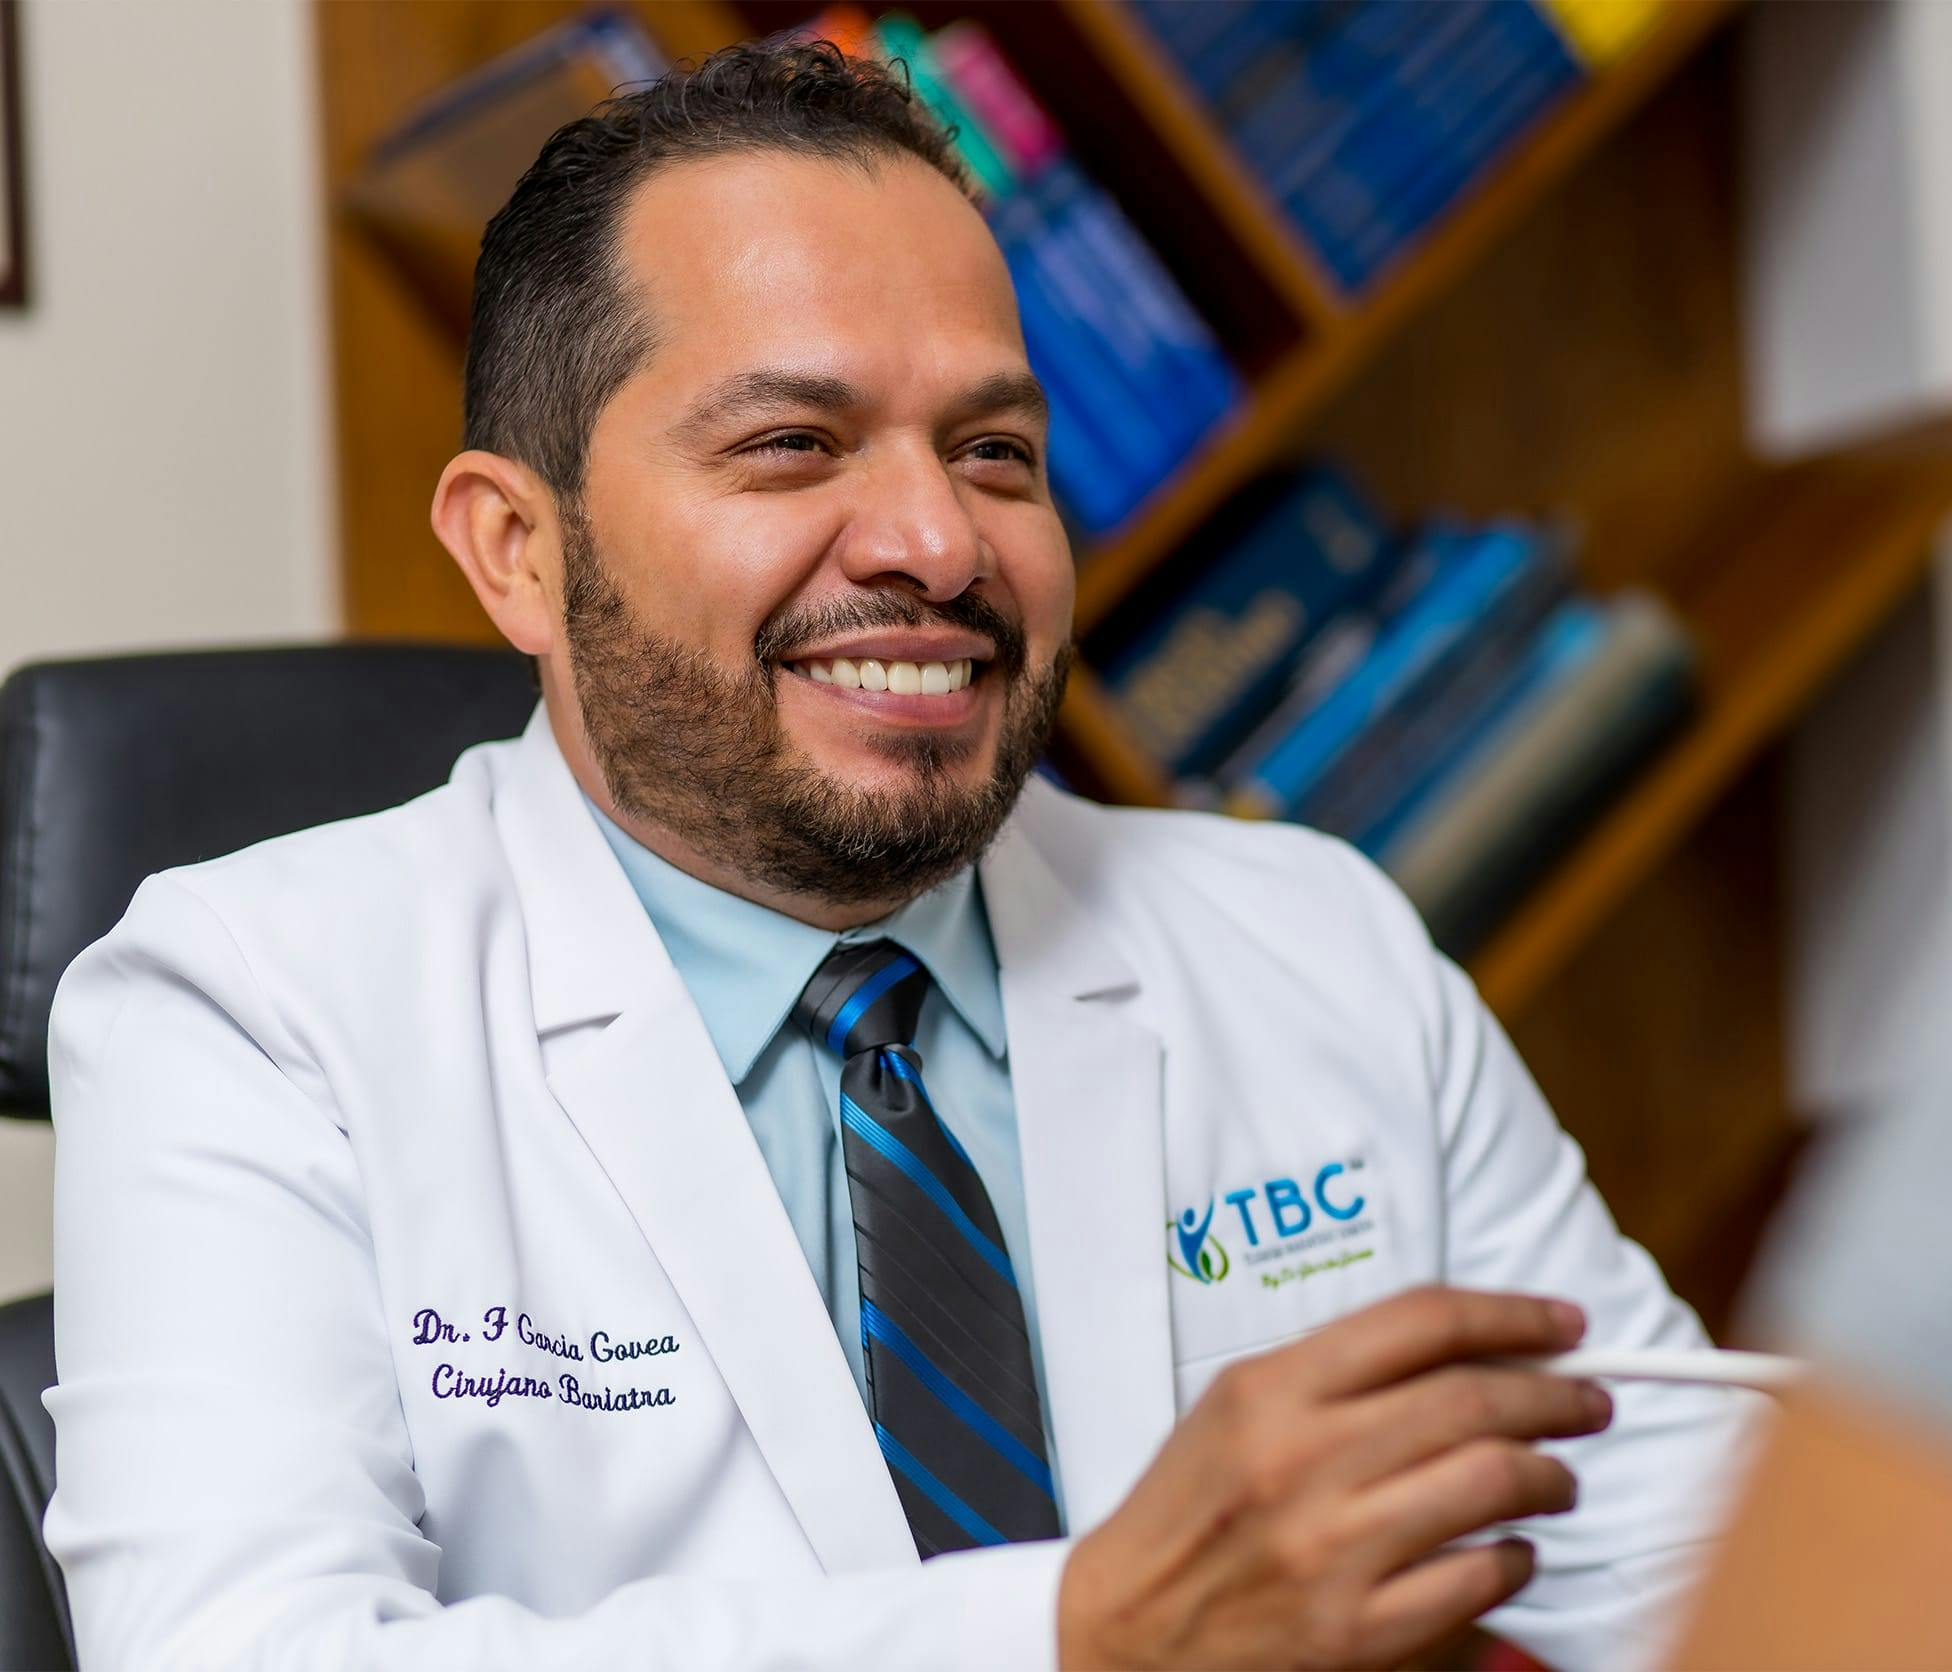 Dr. Fernando Garcia Govea Smiling and speaking with patient